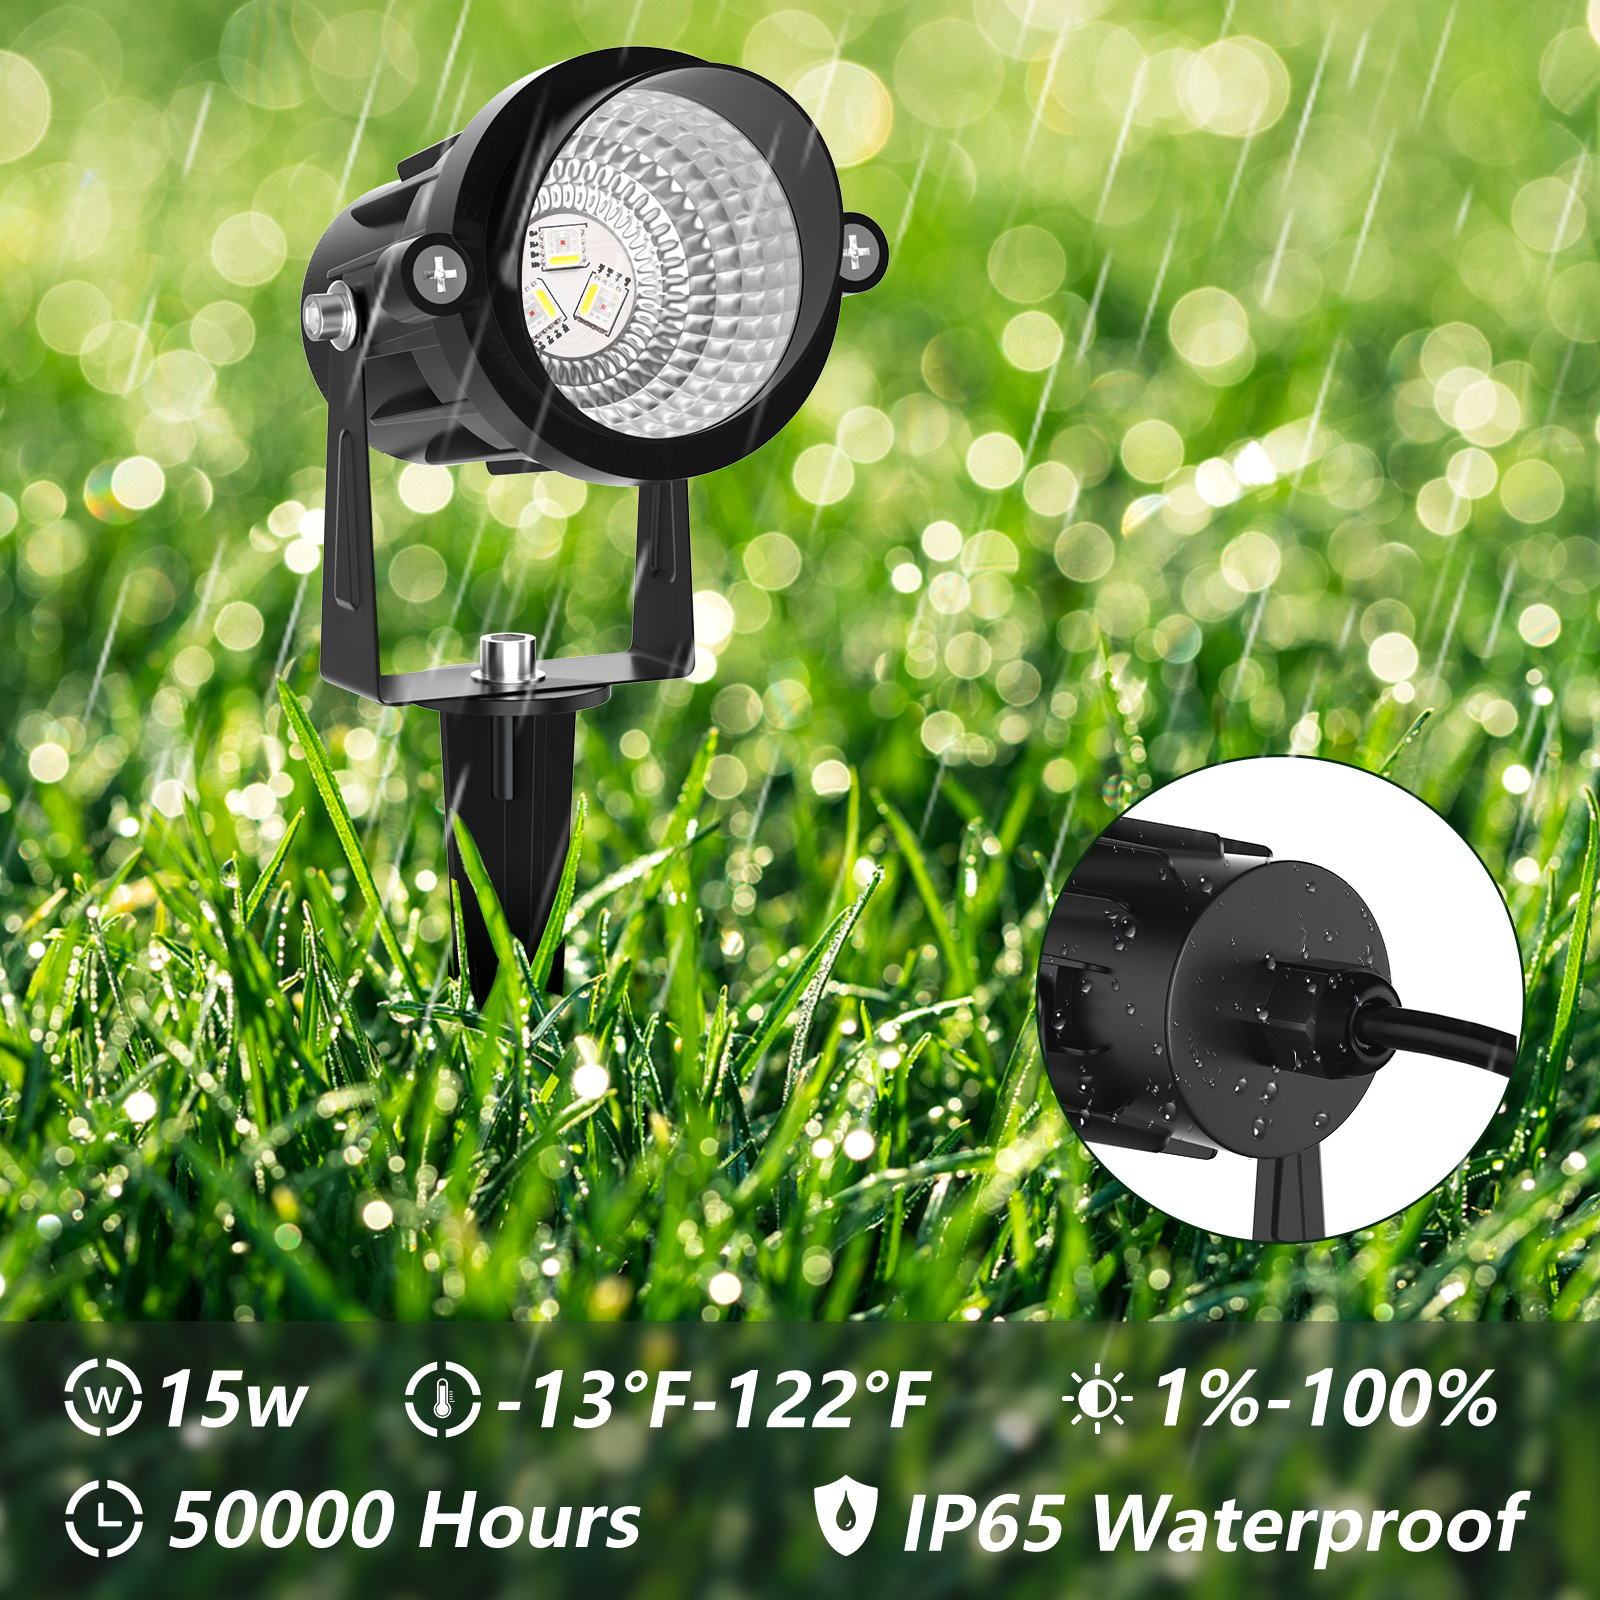 Landscape Light LED,Znfrt Low Voltage IP65 Waterproof Outdoor Landscaping Spot Lights,RGB Color Changing Remote Control Dimmable Outdoor Landscape Lights Suitable for Patio Garden Driveway Porch